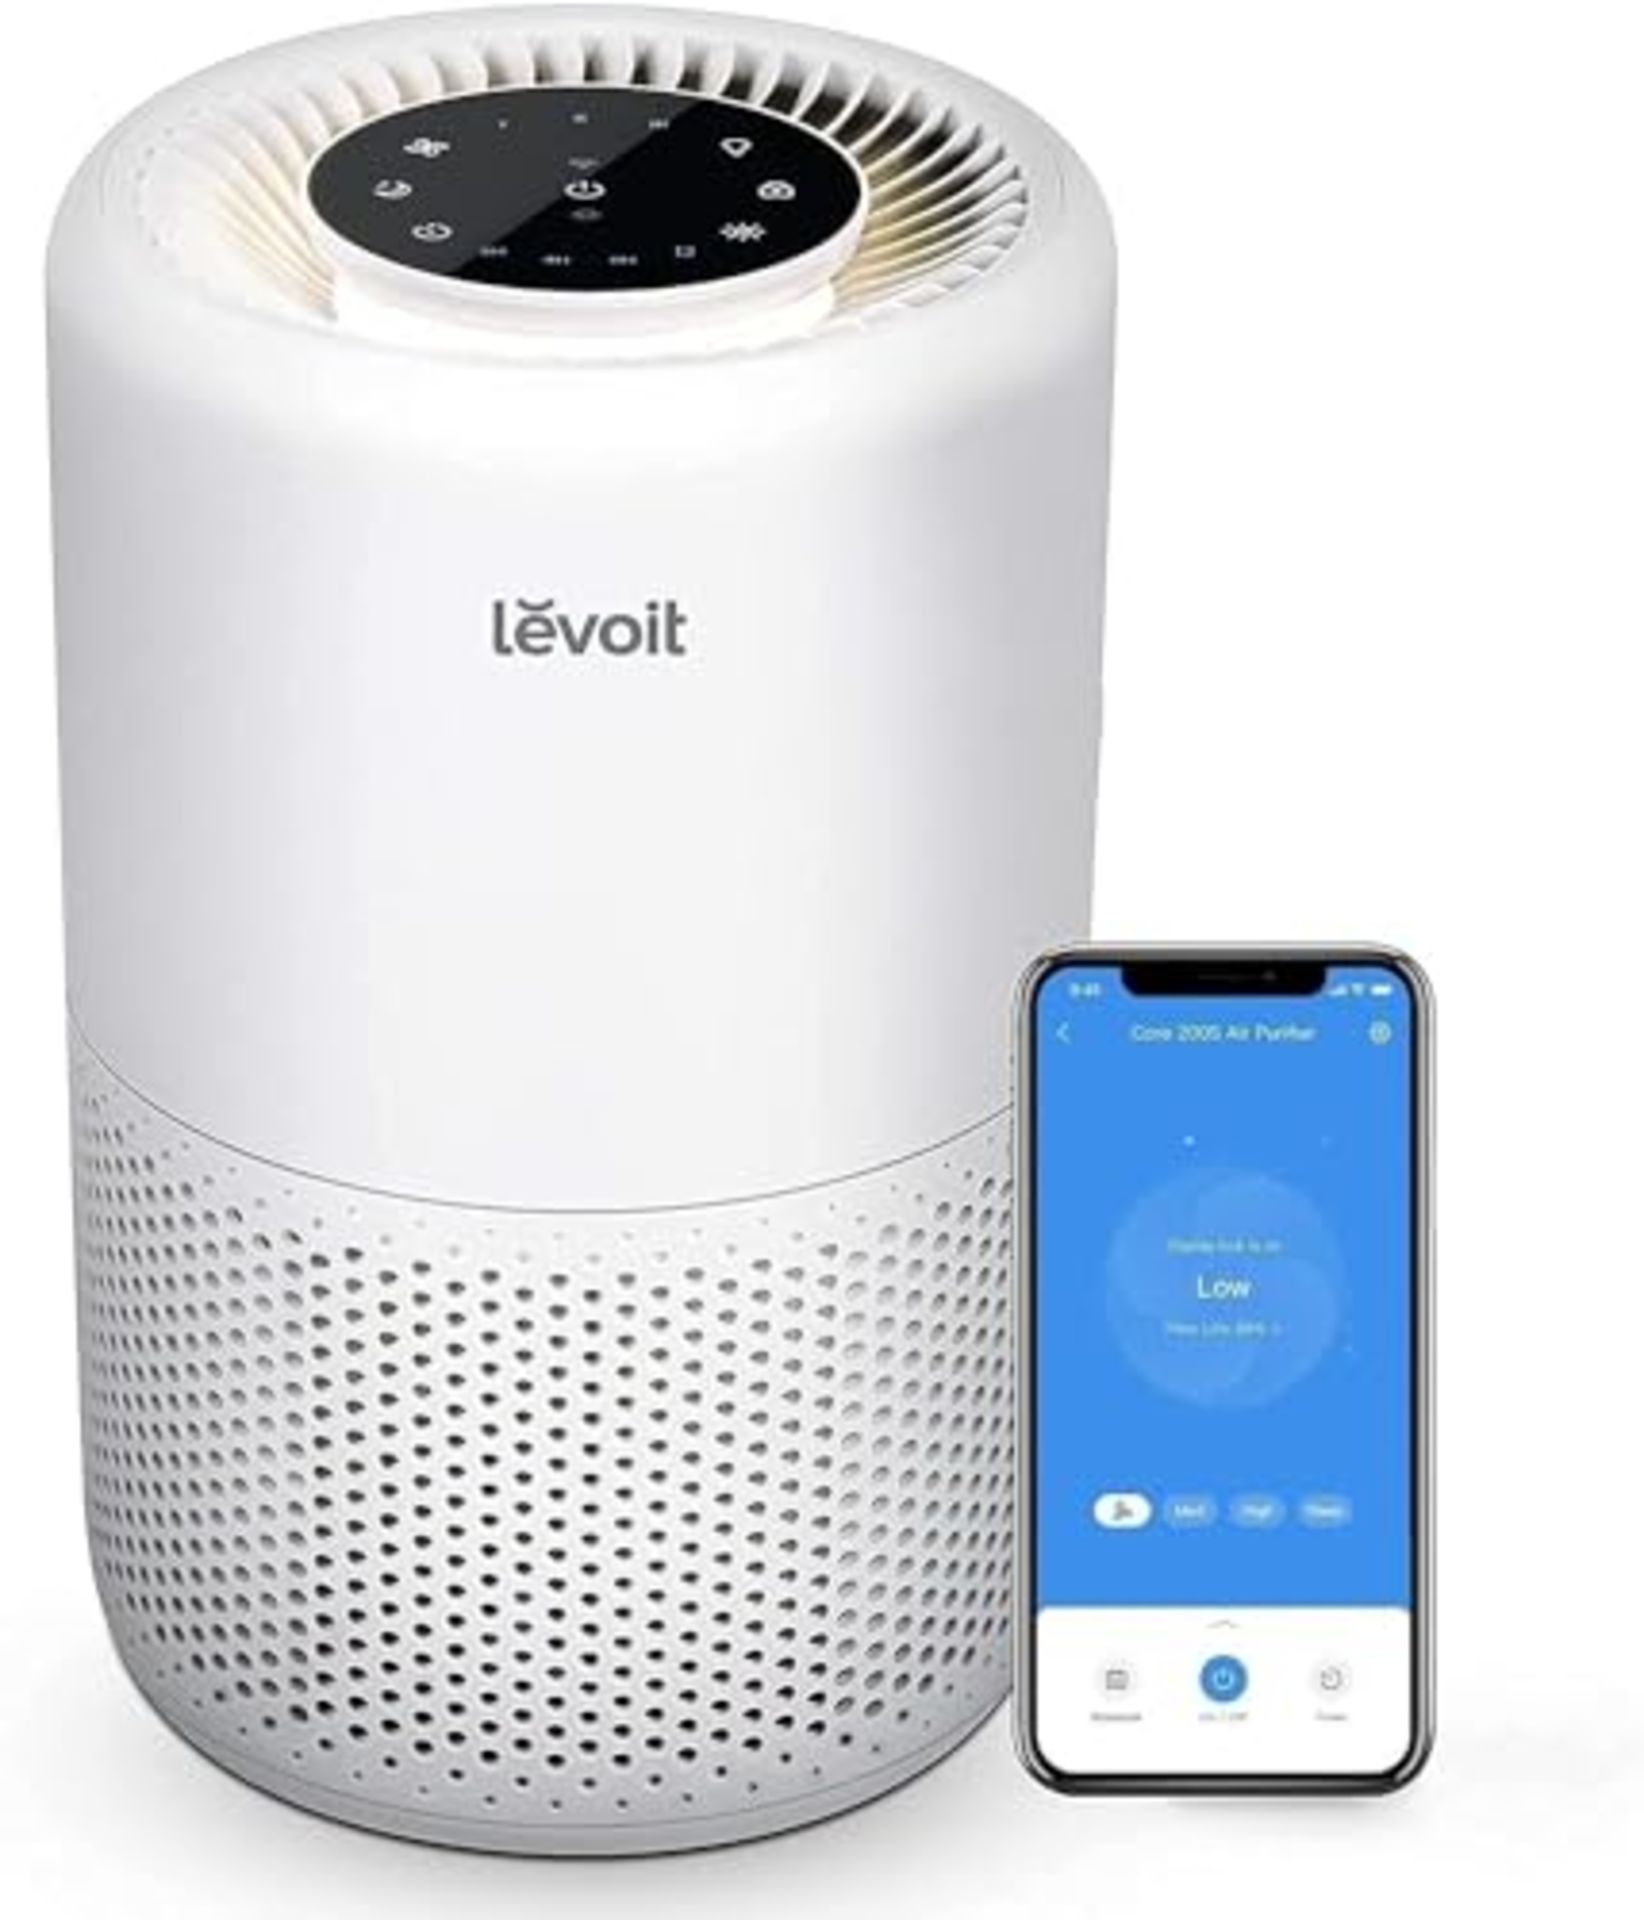 RRP £76.00 LEVOIT Smart WiFi Air Purifier for Home, Alexa Enabled H13 HEPA Filter, CADR 170m³/h, - Image 4 of 6